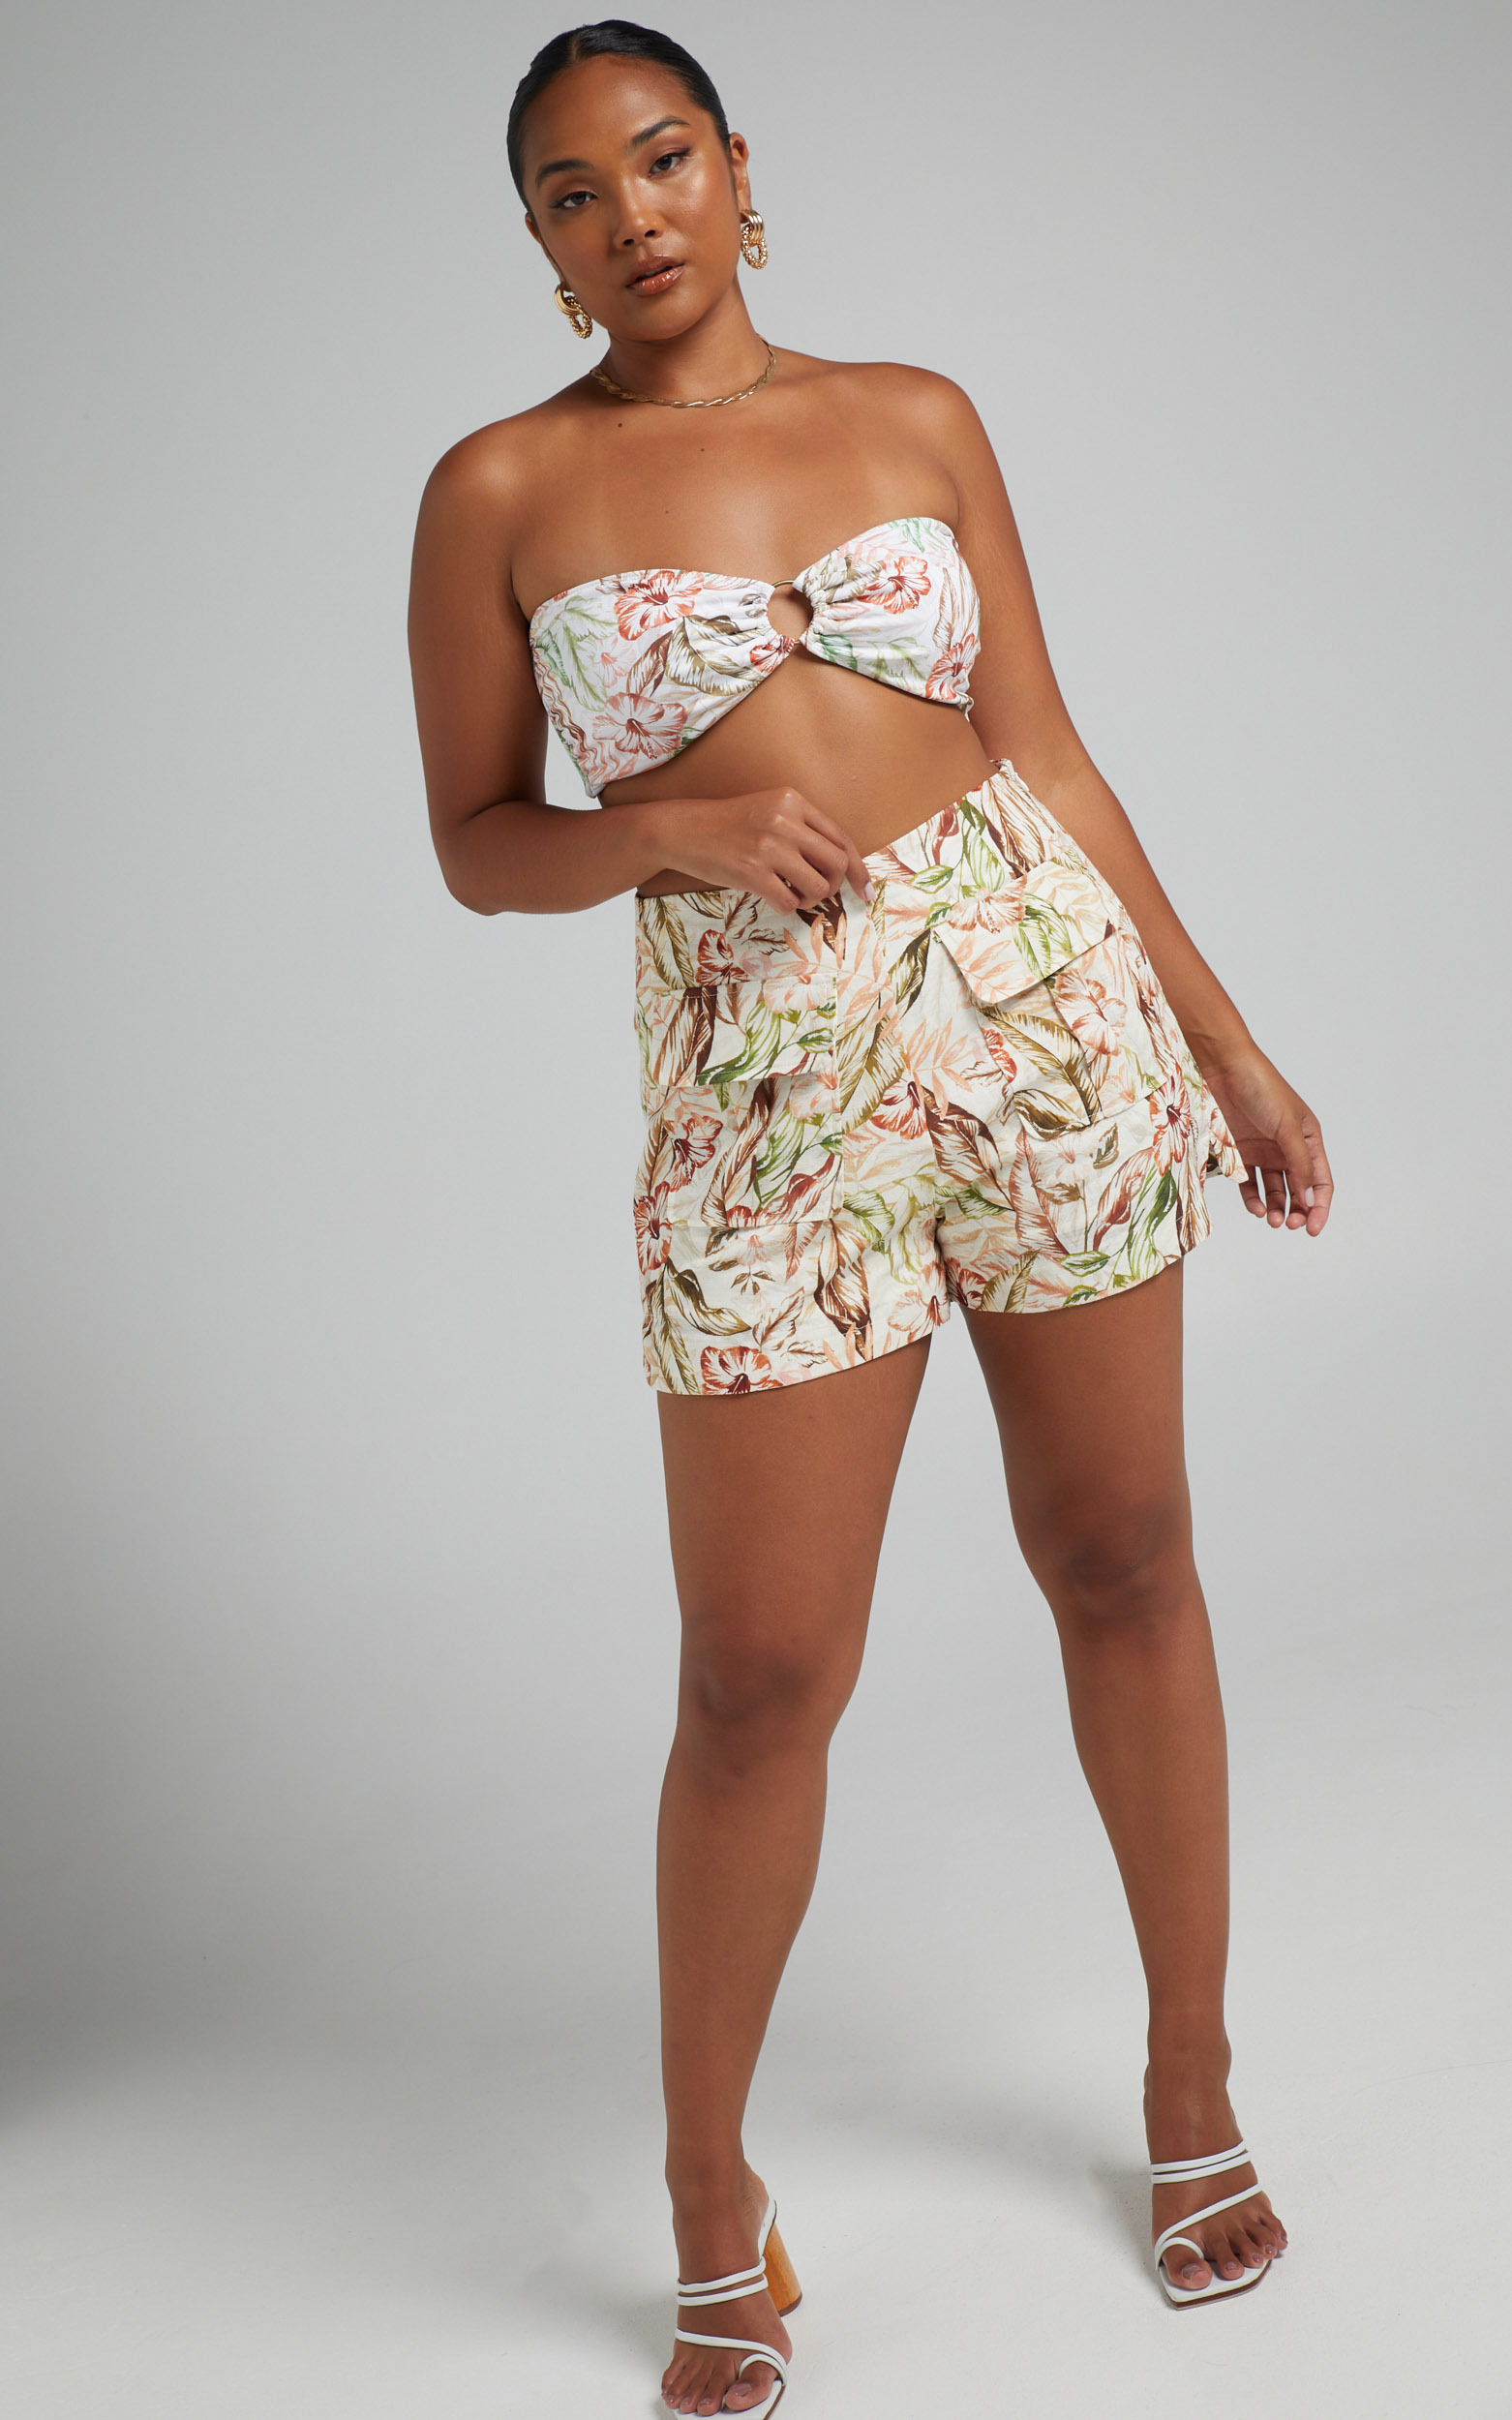 Charlie Holiday - TOPANGA BANDEAU in HIBISCUS - L, WHT1, hi-res image number null